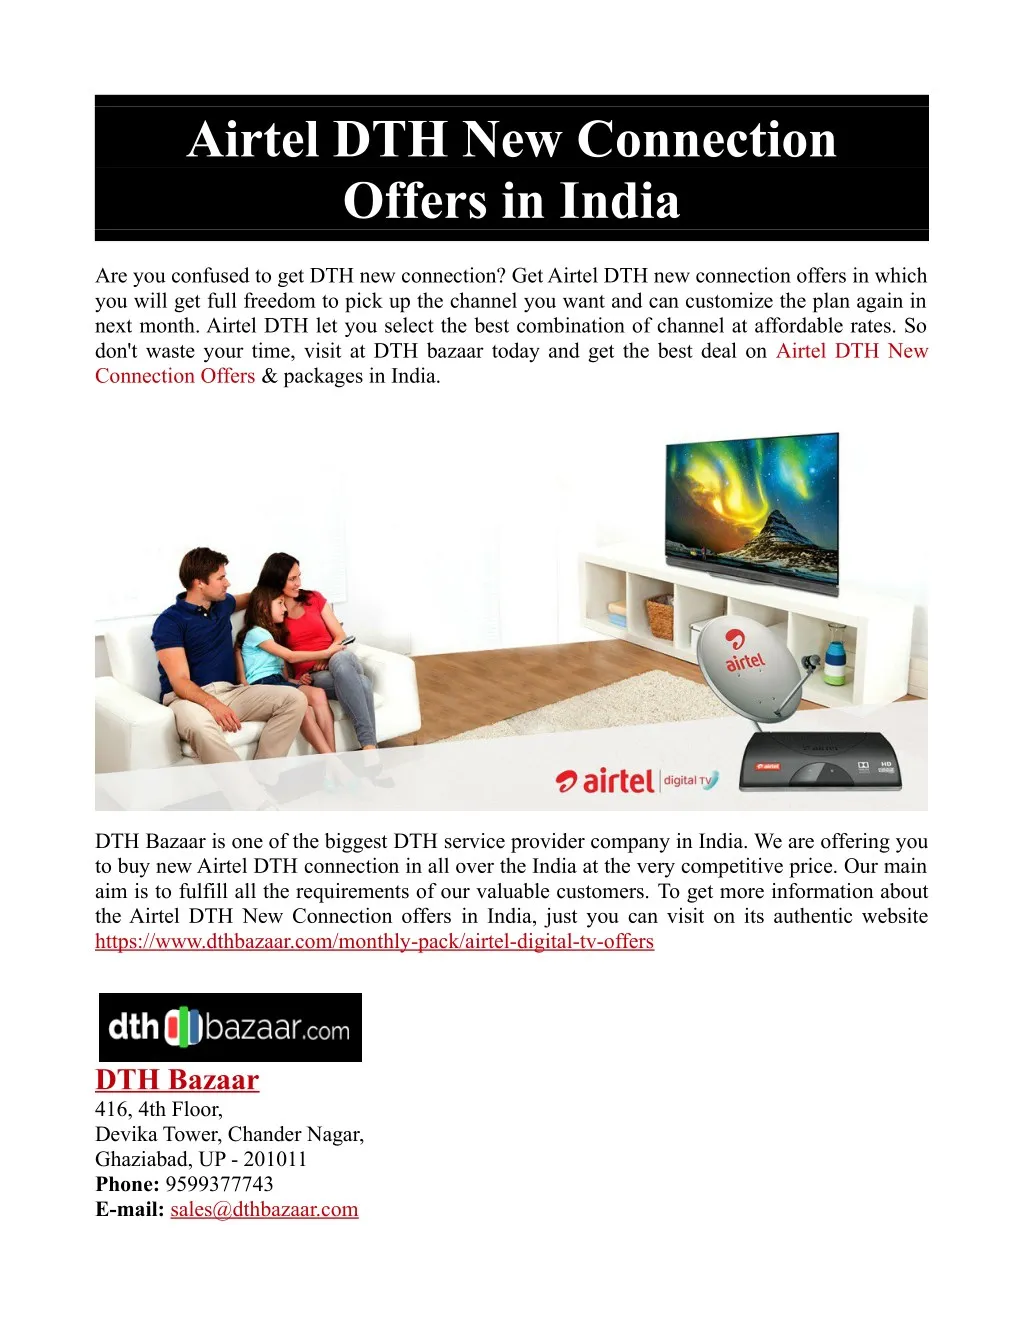 airtel dth new connection offers in india